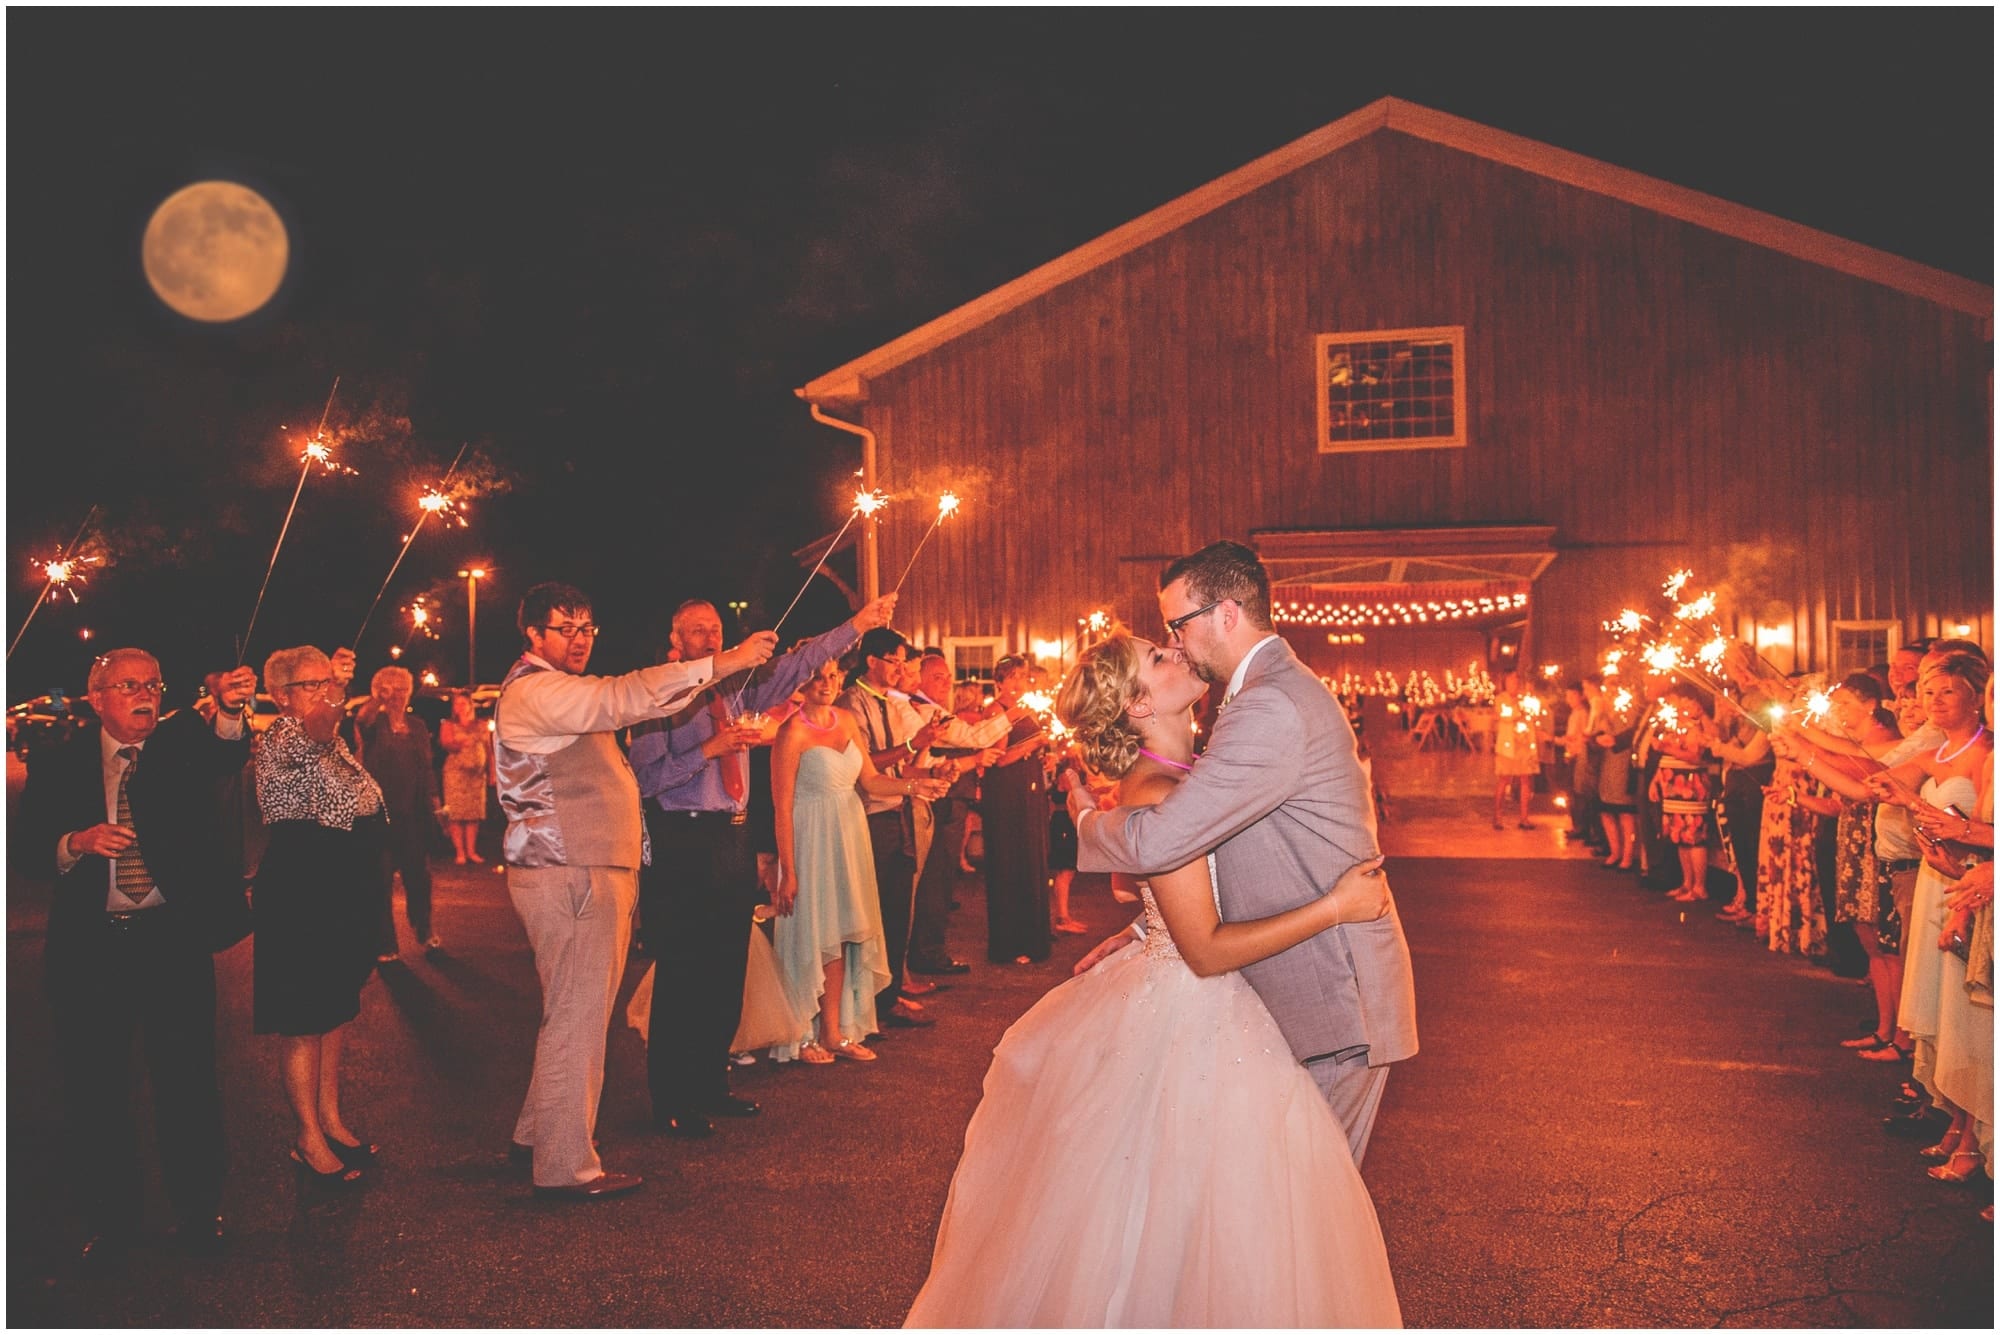 County Line Orchard Wedding Photographer bride and groom sparkler exit and kiss with full moon 